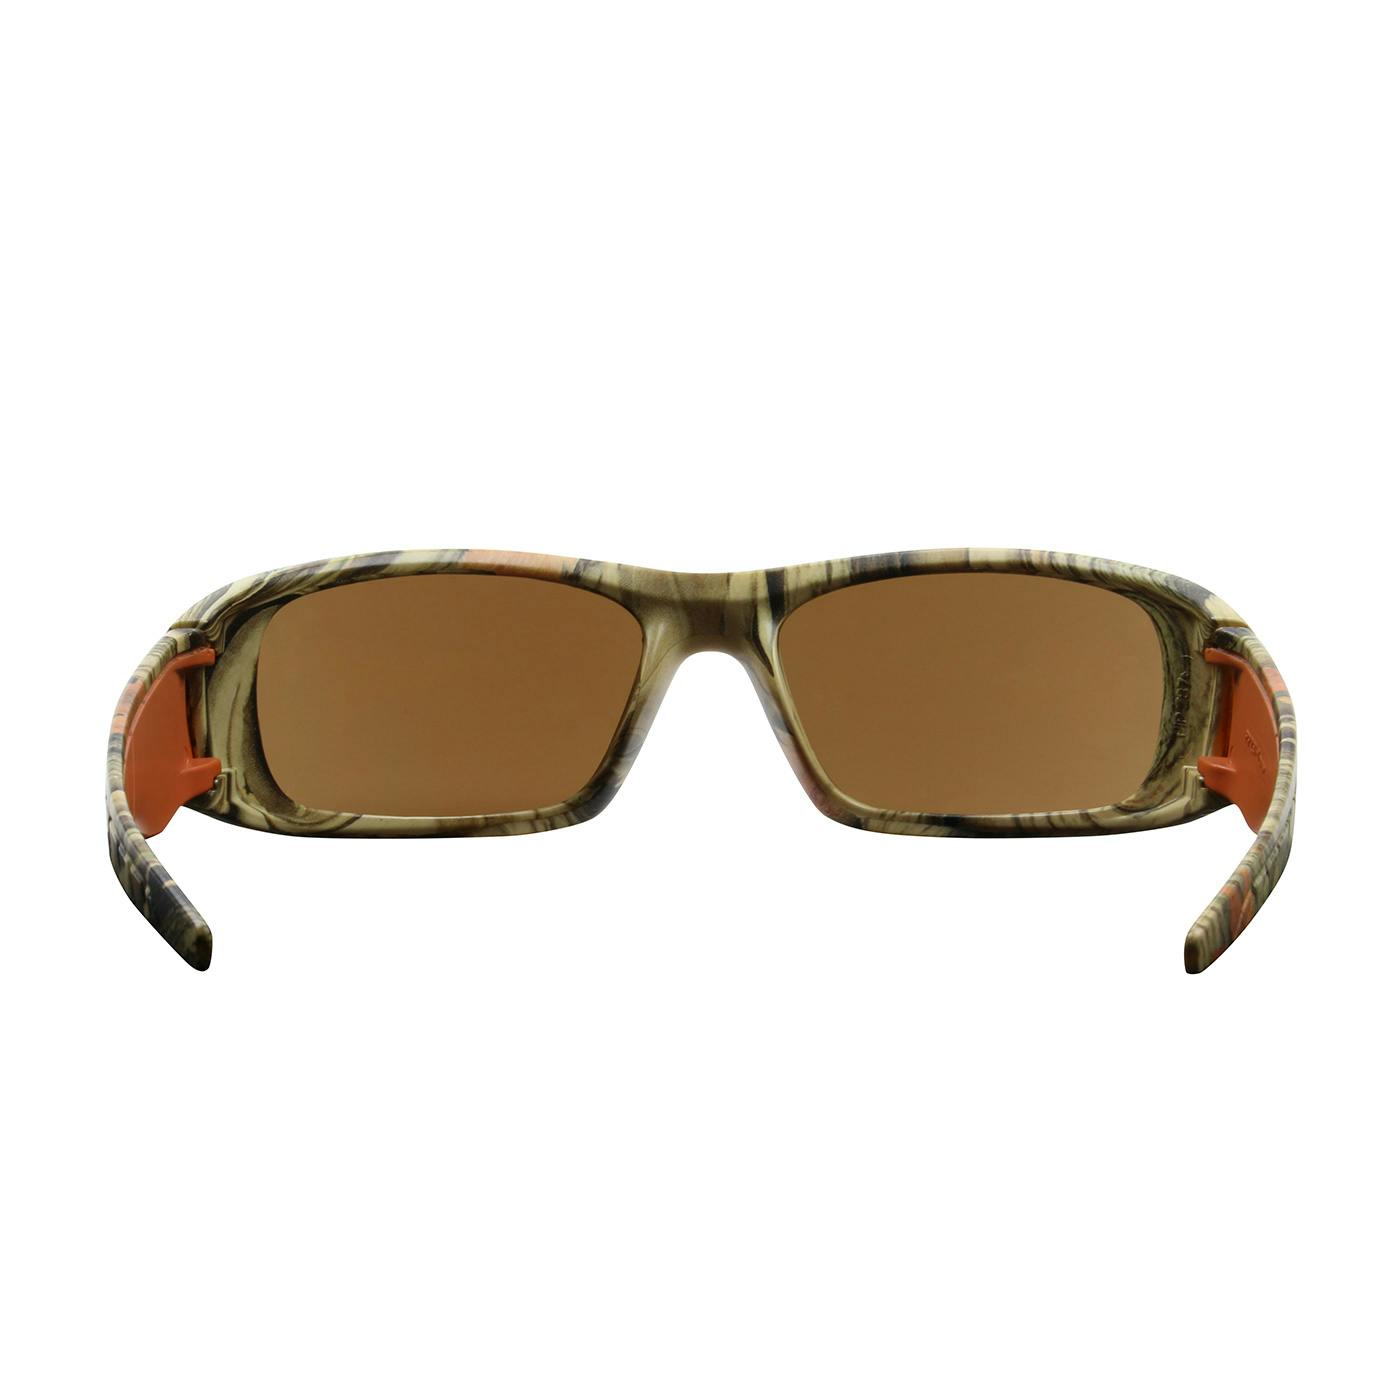 Full Frame Safety Glasses with Camouflage Frame, Brown Lens and Anti-Scratch / Anti-Fog Coating, Camouflage (250-53-1024) - OS